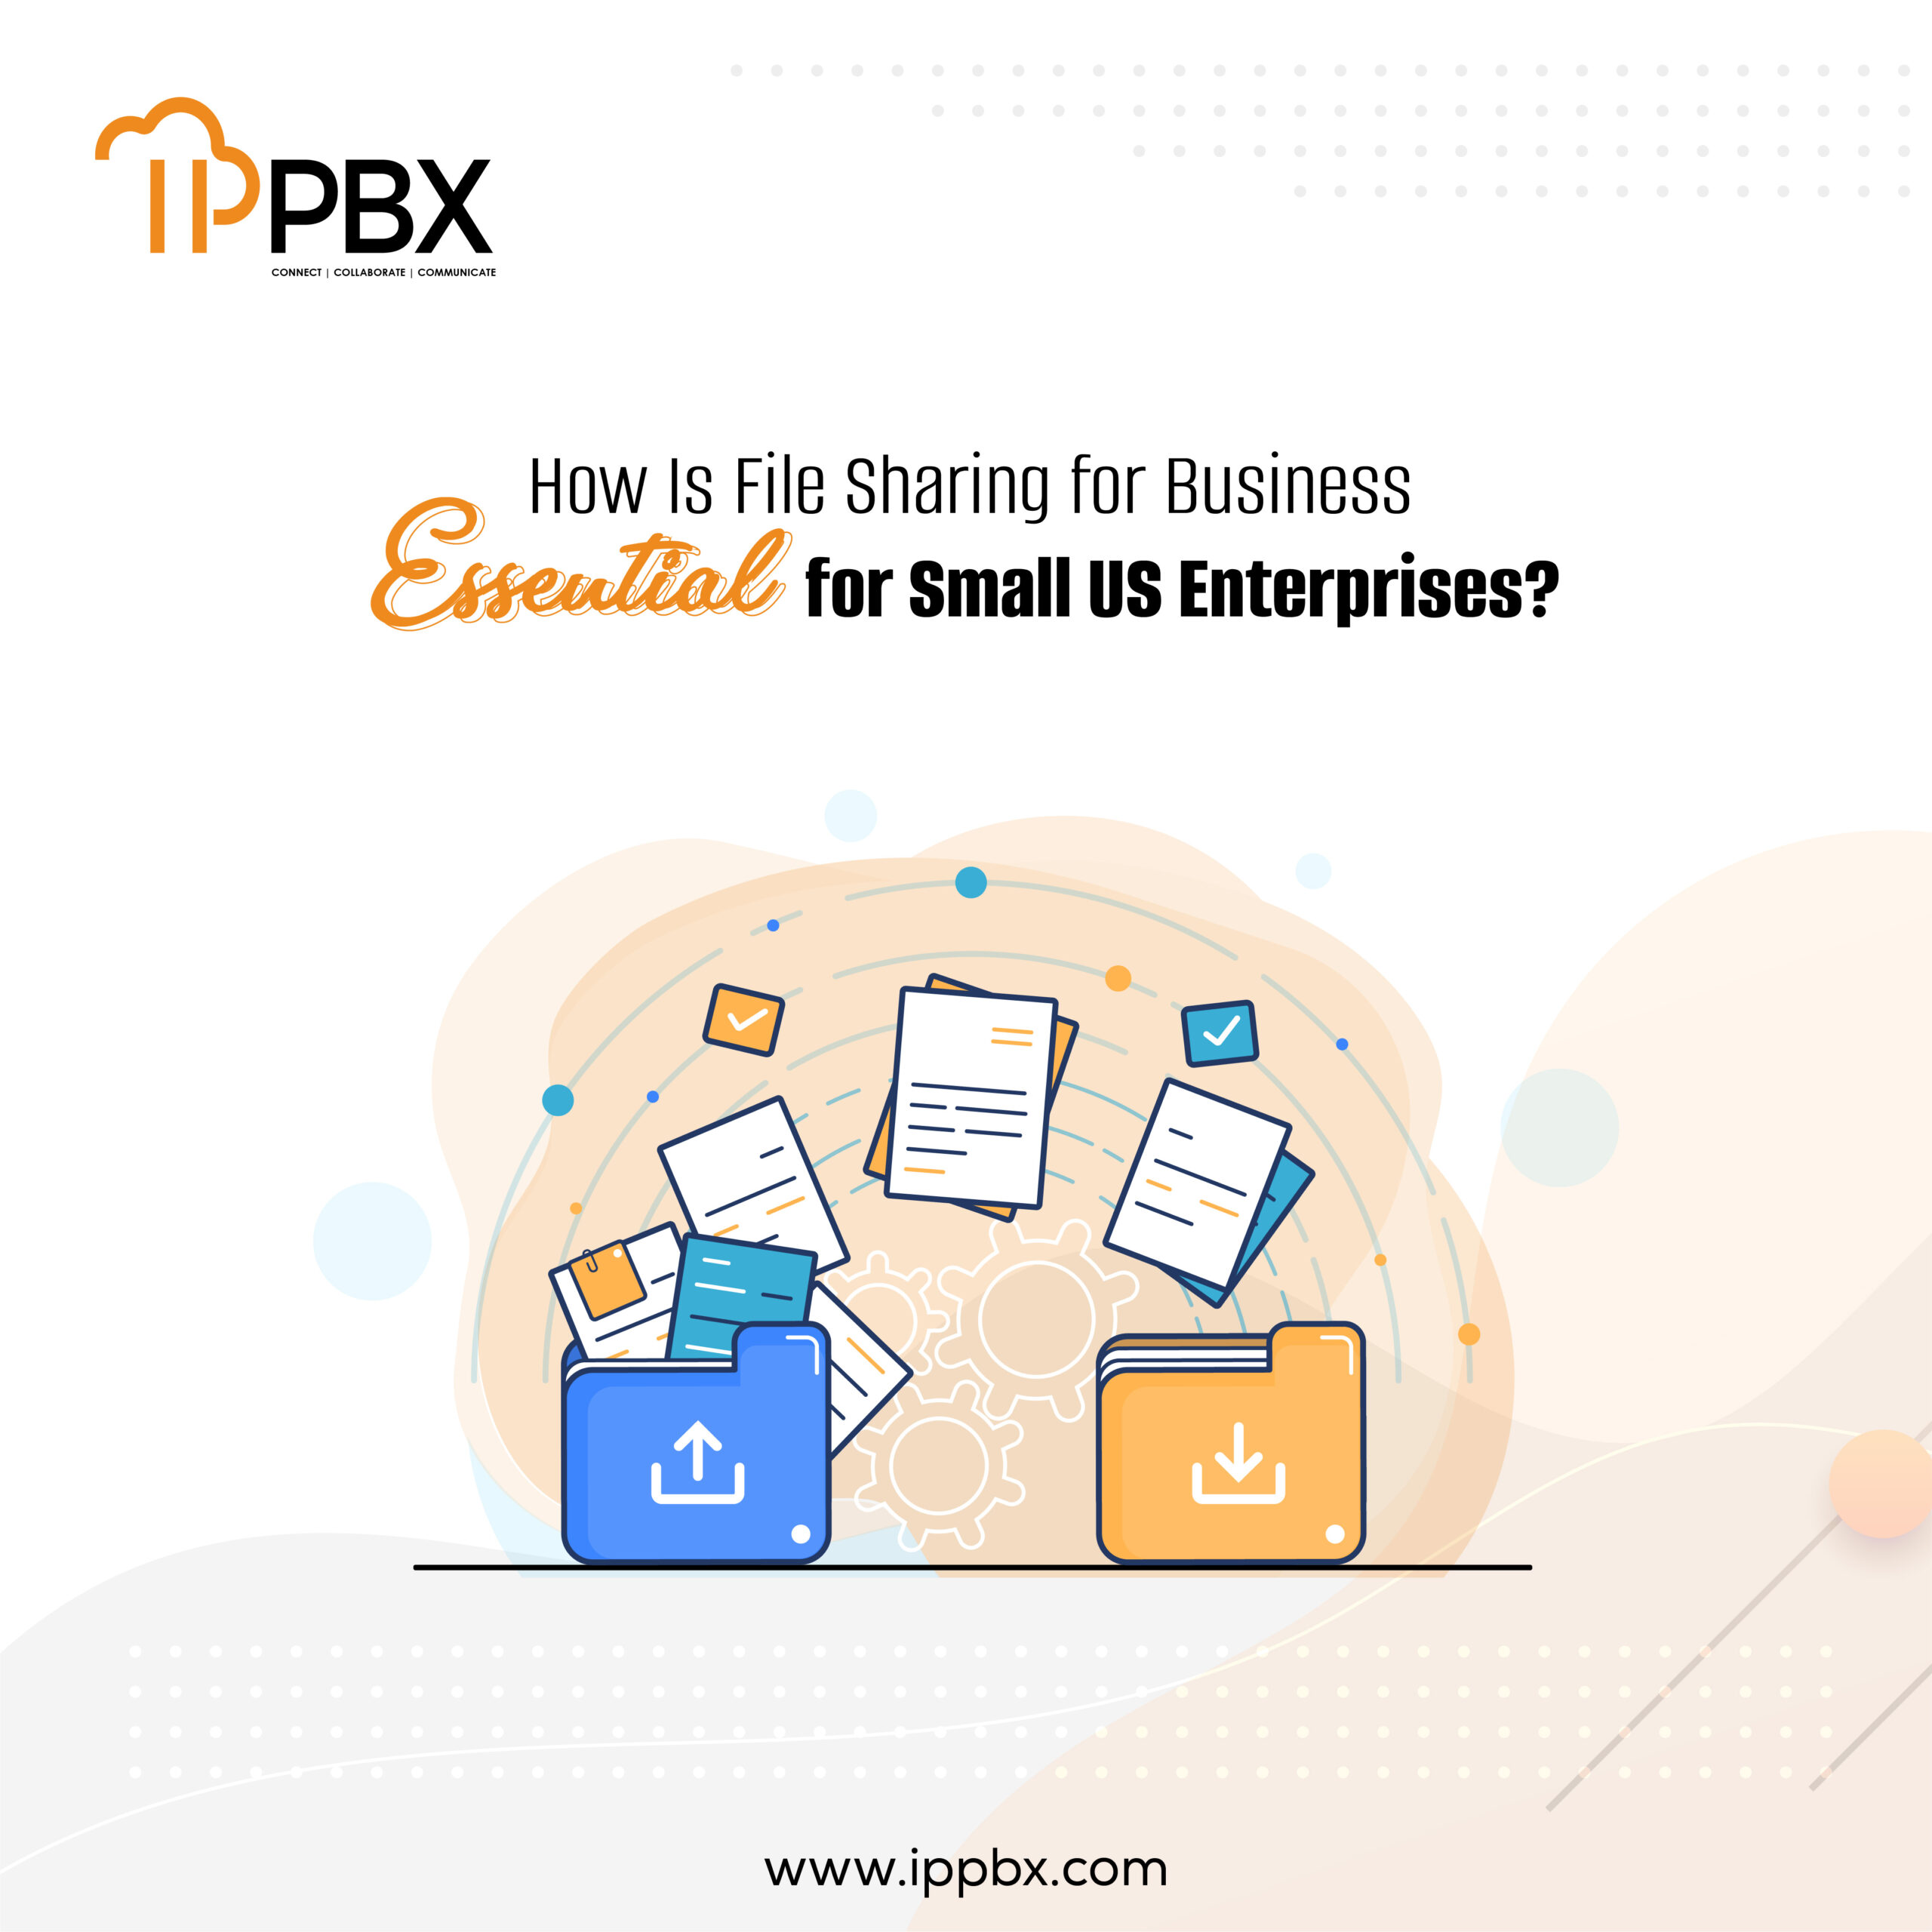 How Is File Sharing for Business Essential for Small US Enterprises?